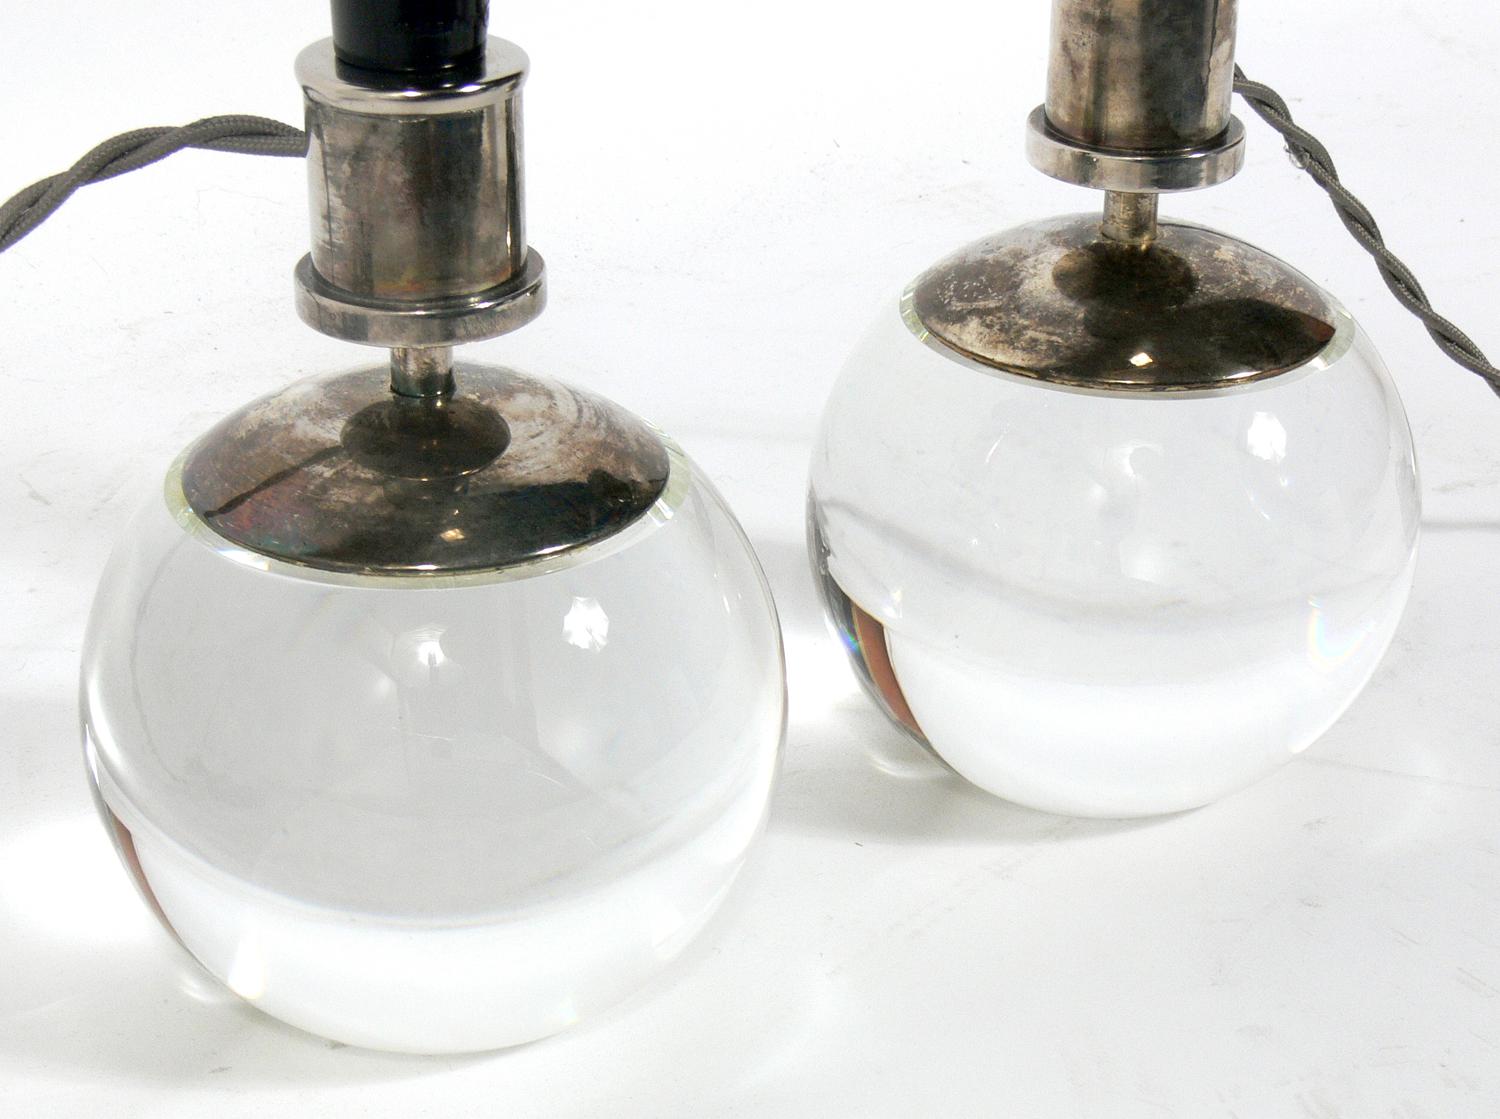 French Art Deco style Lamps, in the manner of Jacques Adnet. After an Adnet design of the 1930s, these examples are believed to be circa 1980s. They have been rewired and are ready to use. The price noted includes the shades.